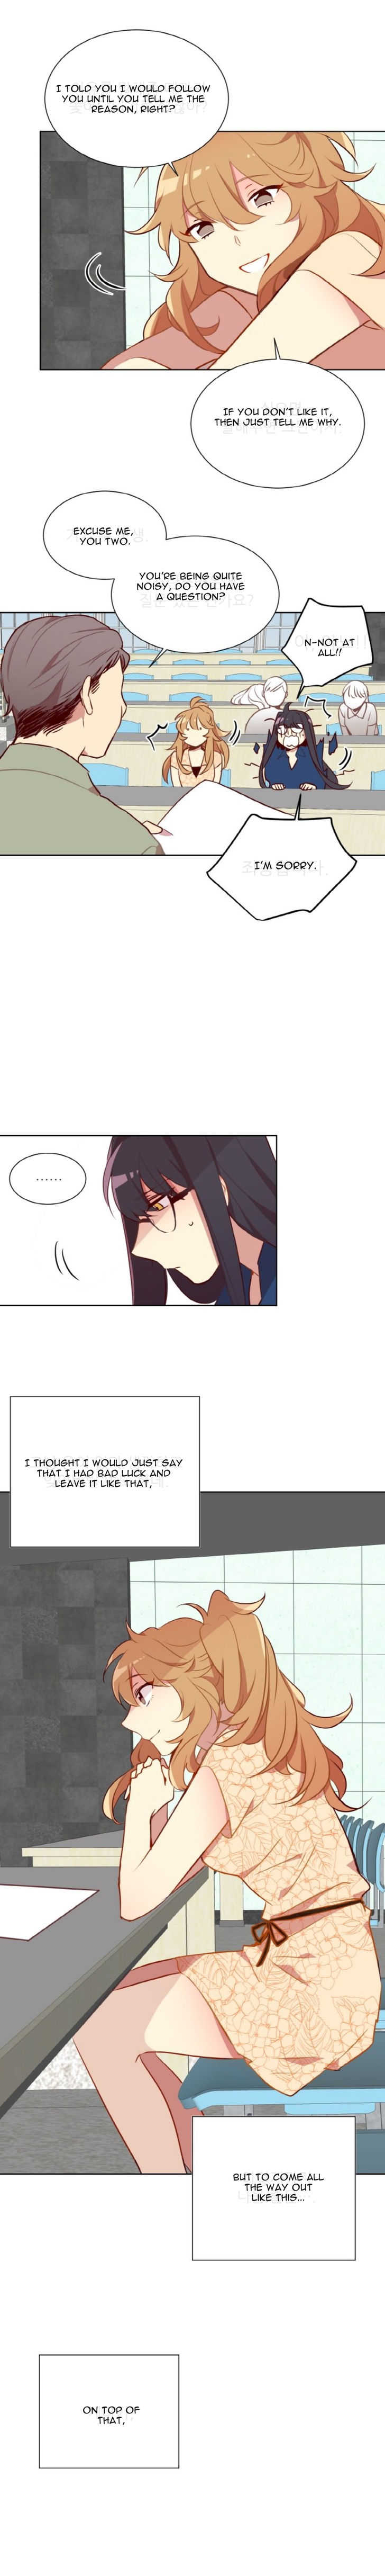 [Yulseo] Two Lives in the Same House Ch. 1-24 [English] - Page 18